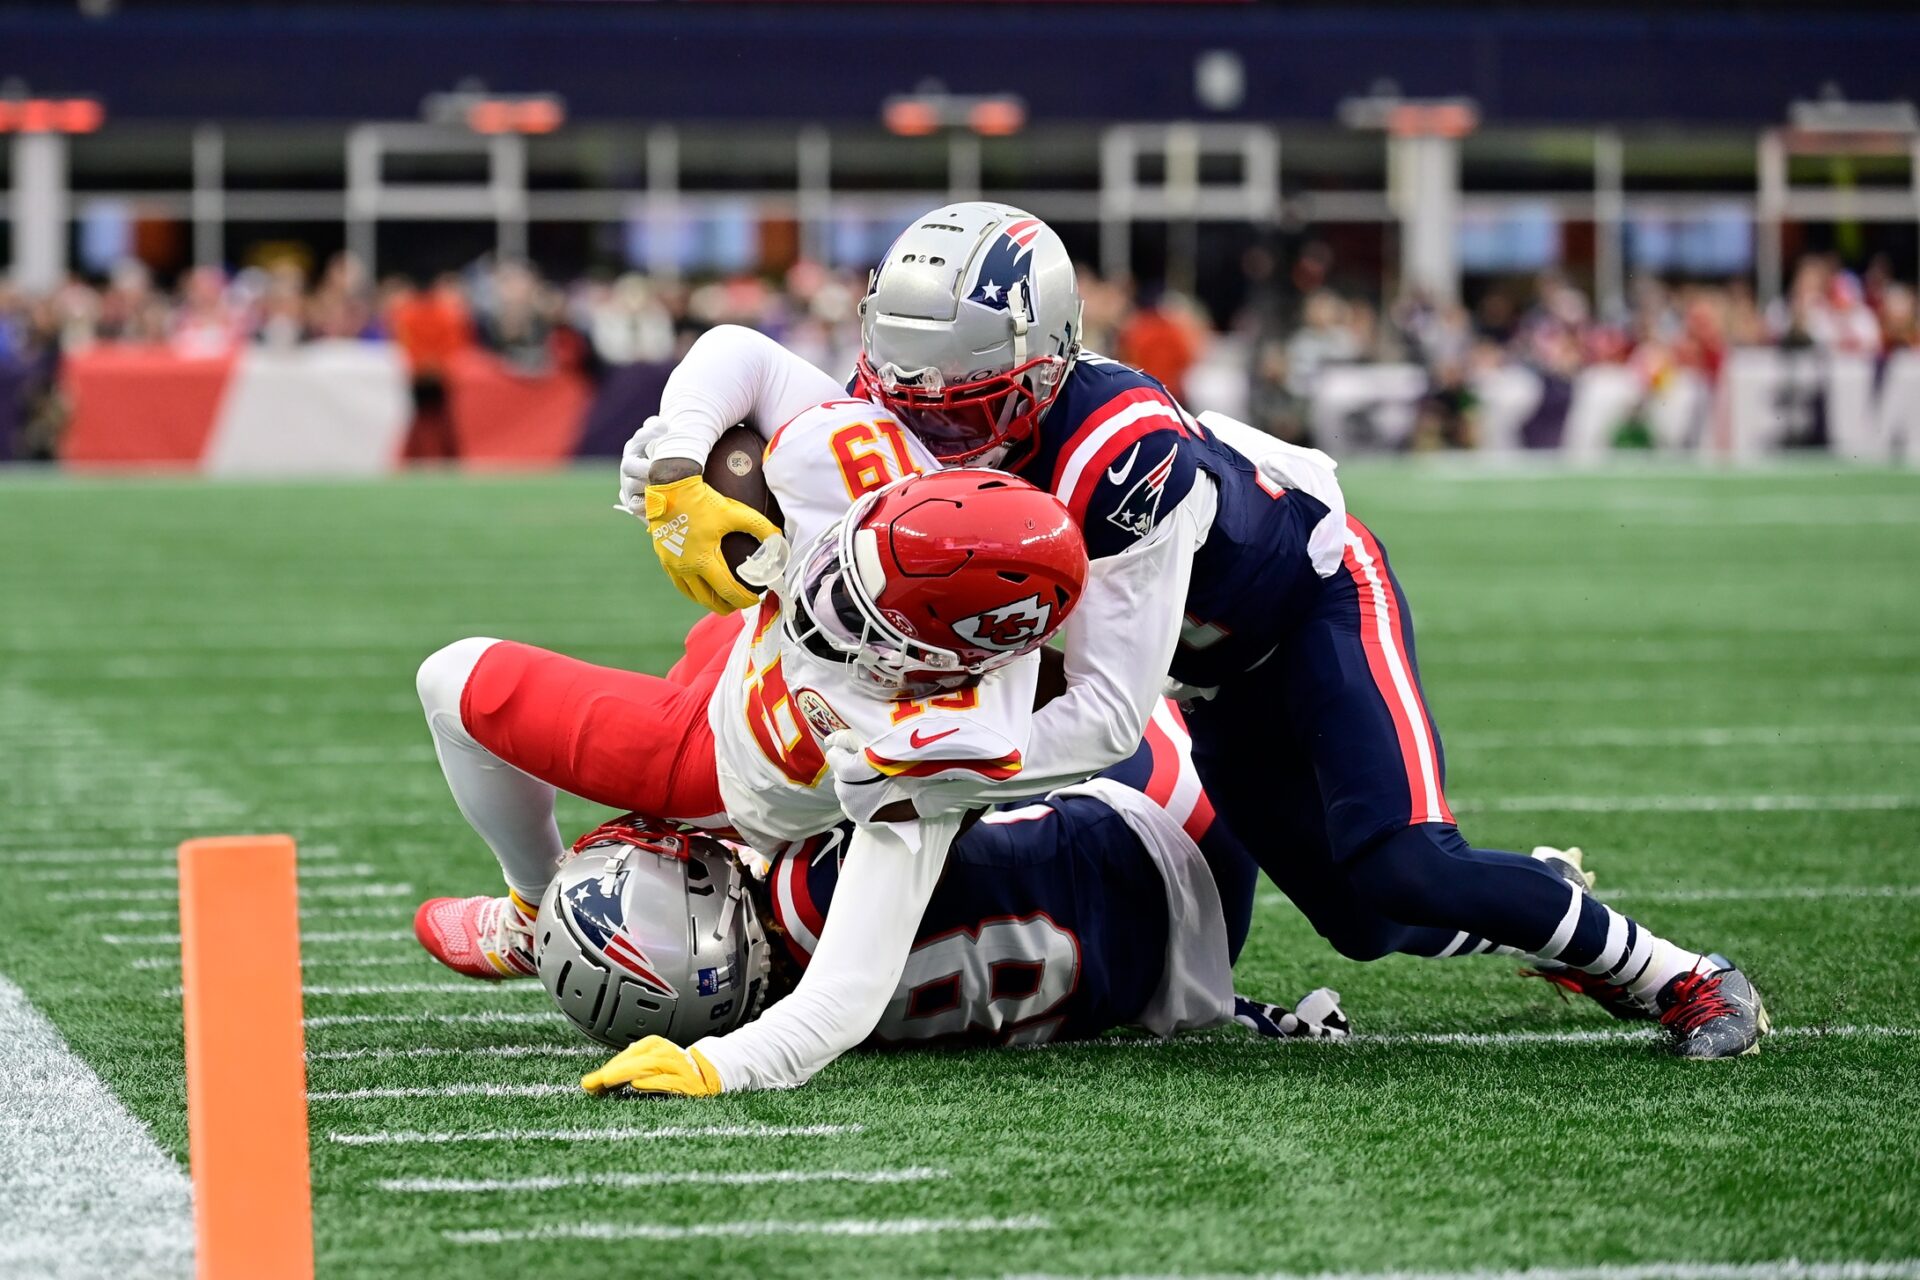 Kansas City Chiefs wide receiver Kadarius Toney (19) is tackled short of the endzone during the first half against the New England Patriots at Gillette Stadium.